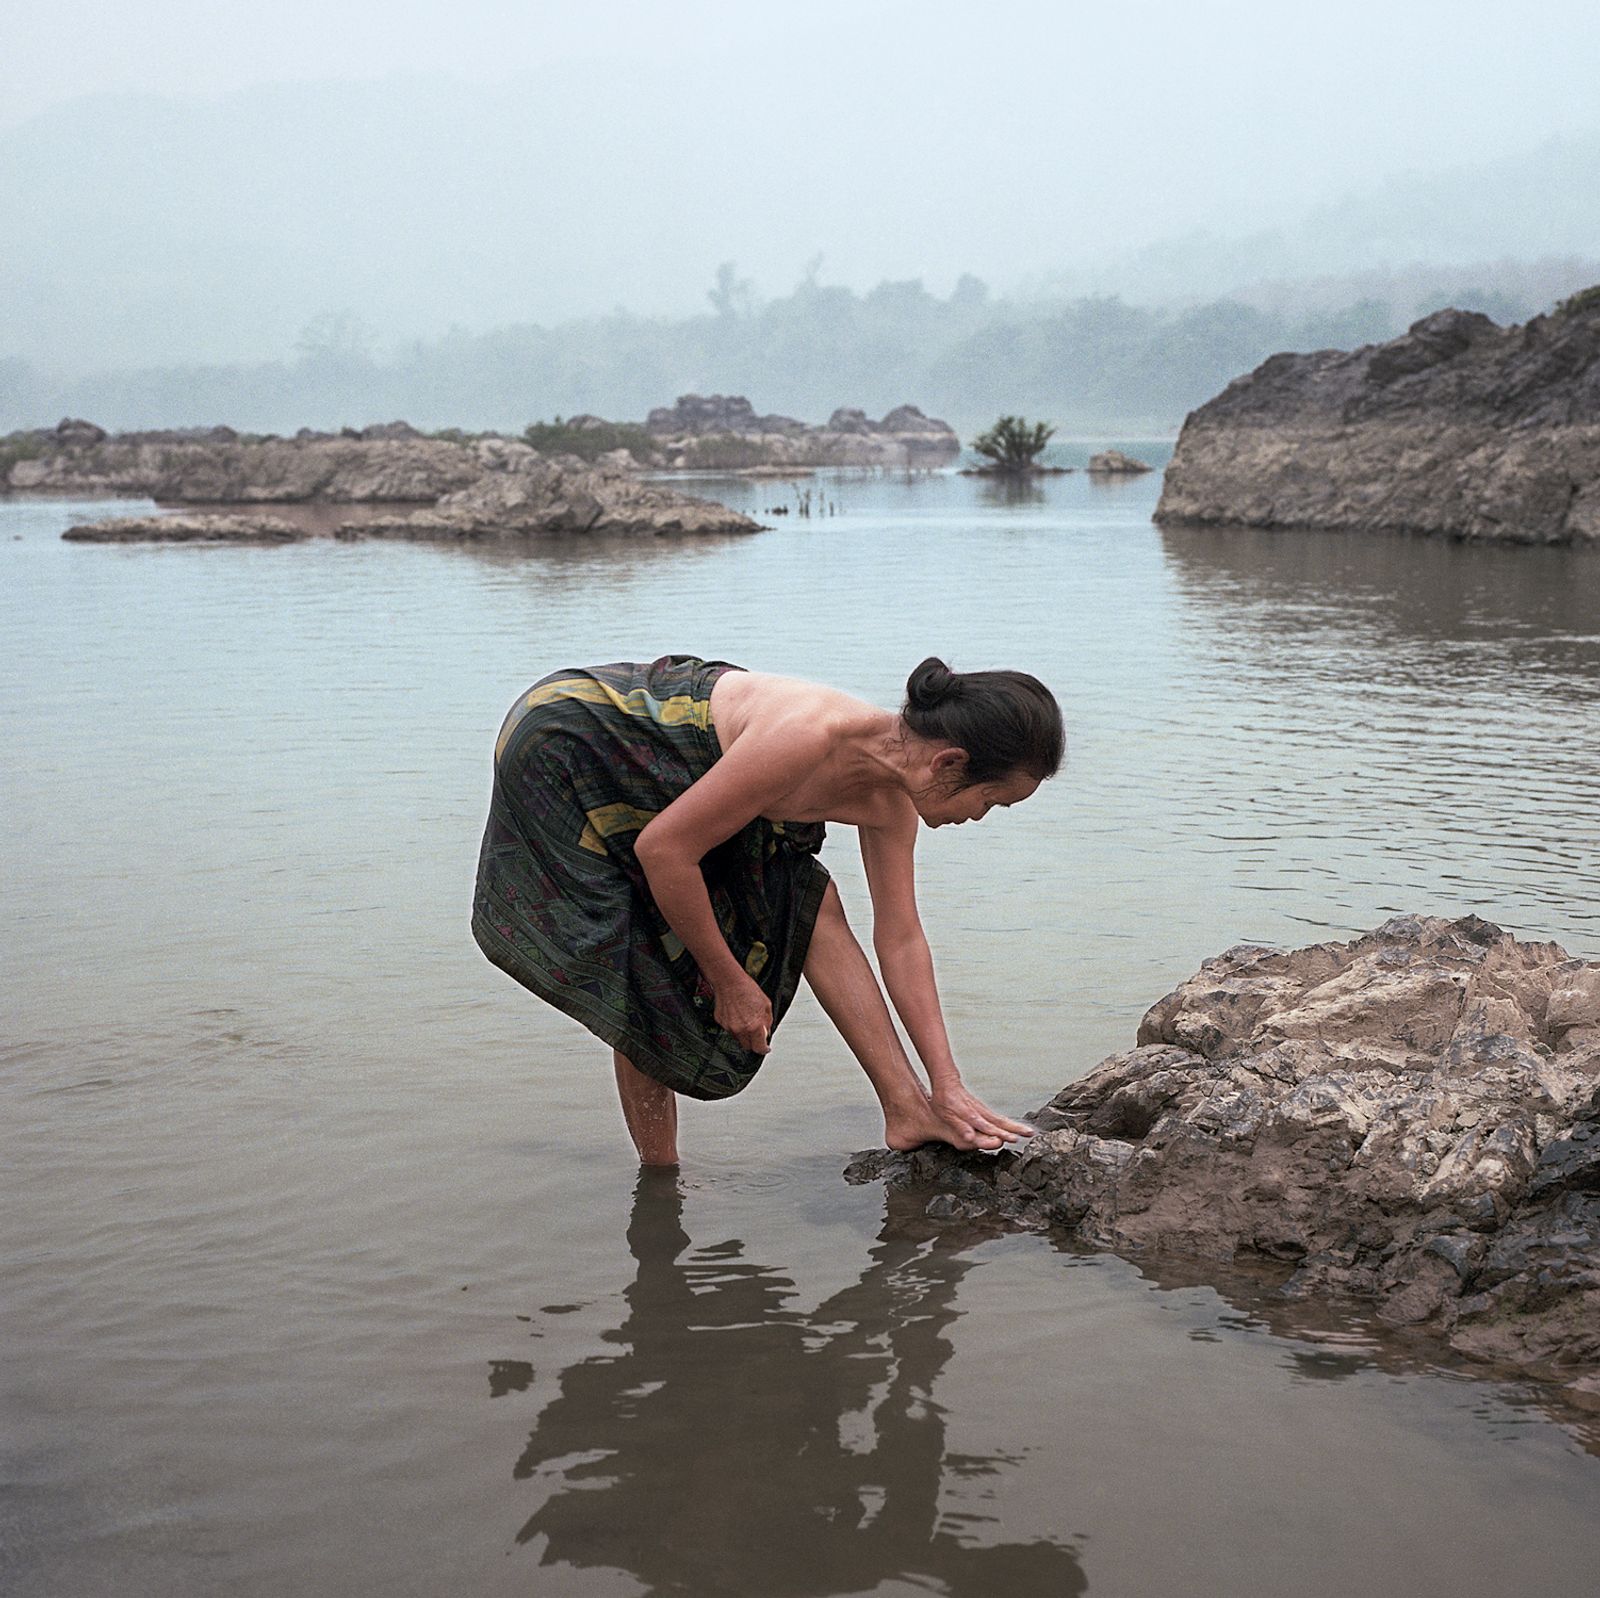 © Huiying Ore - A villager living along the Mekong River takes her daily evening bath in the river.